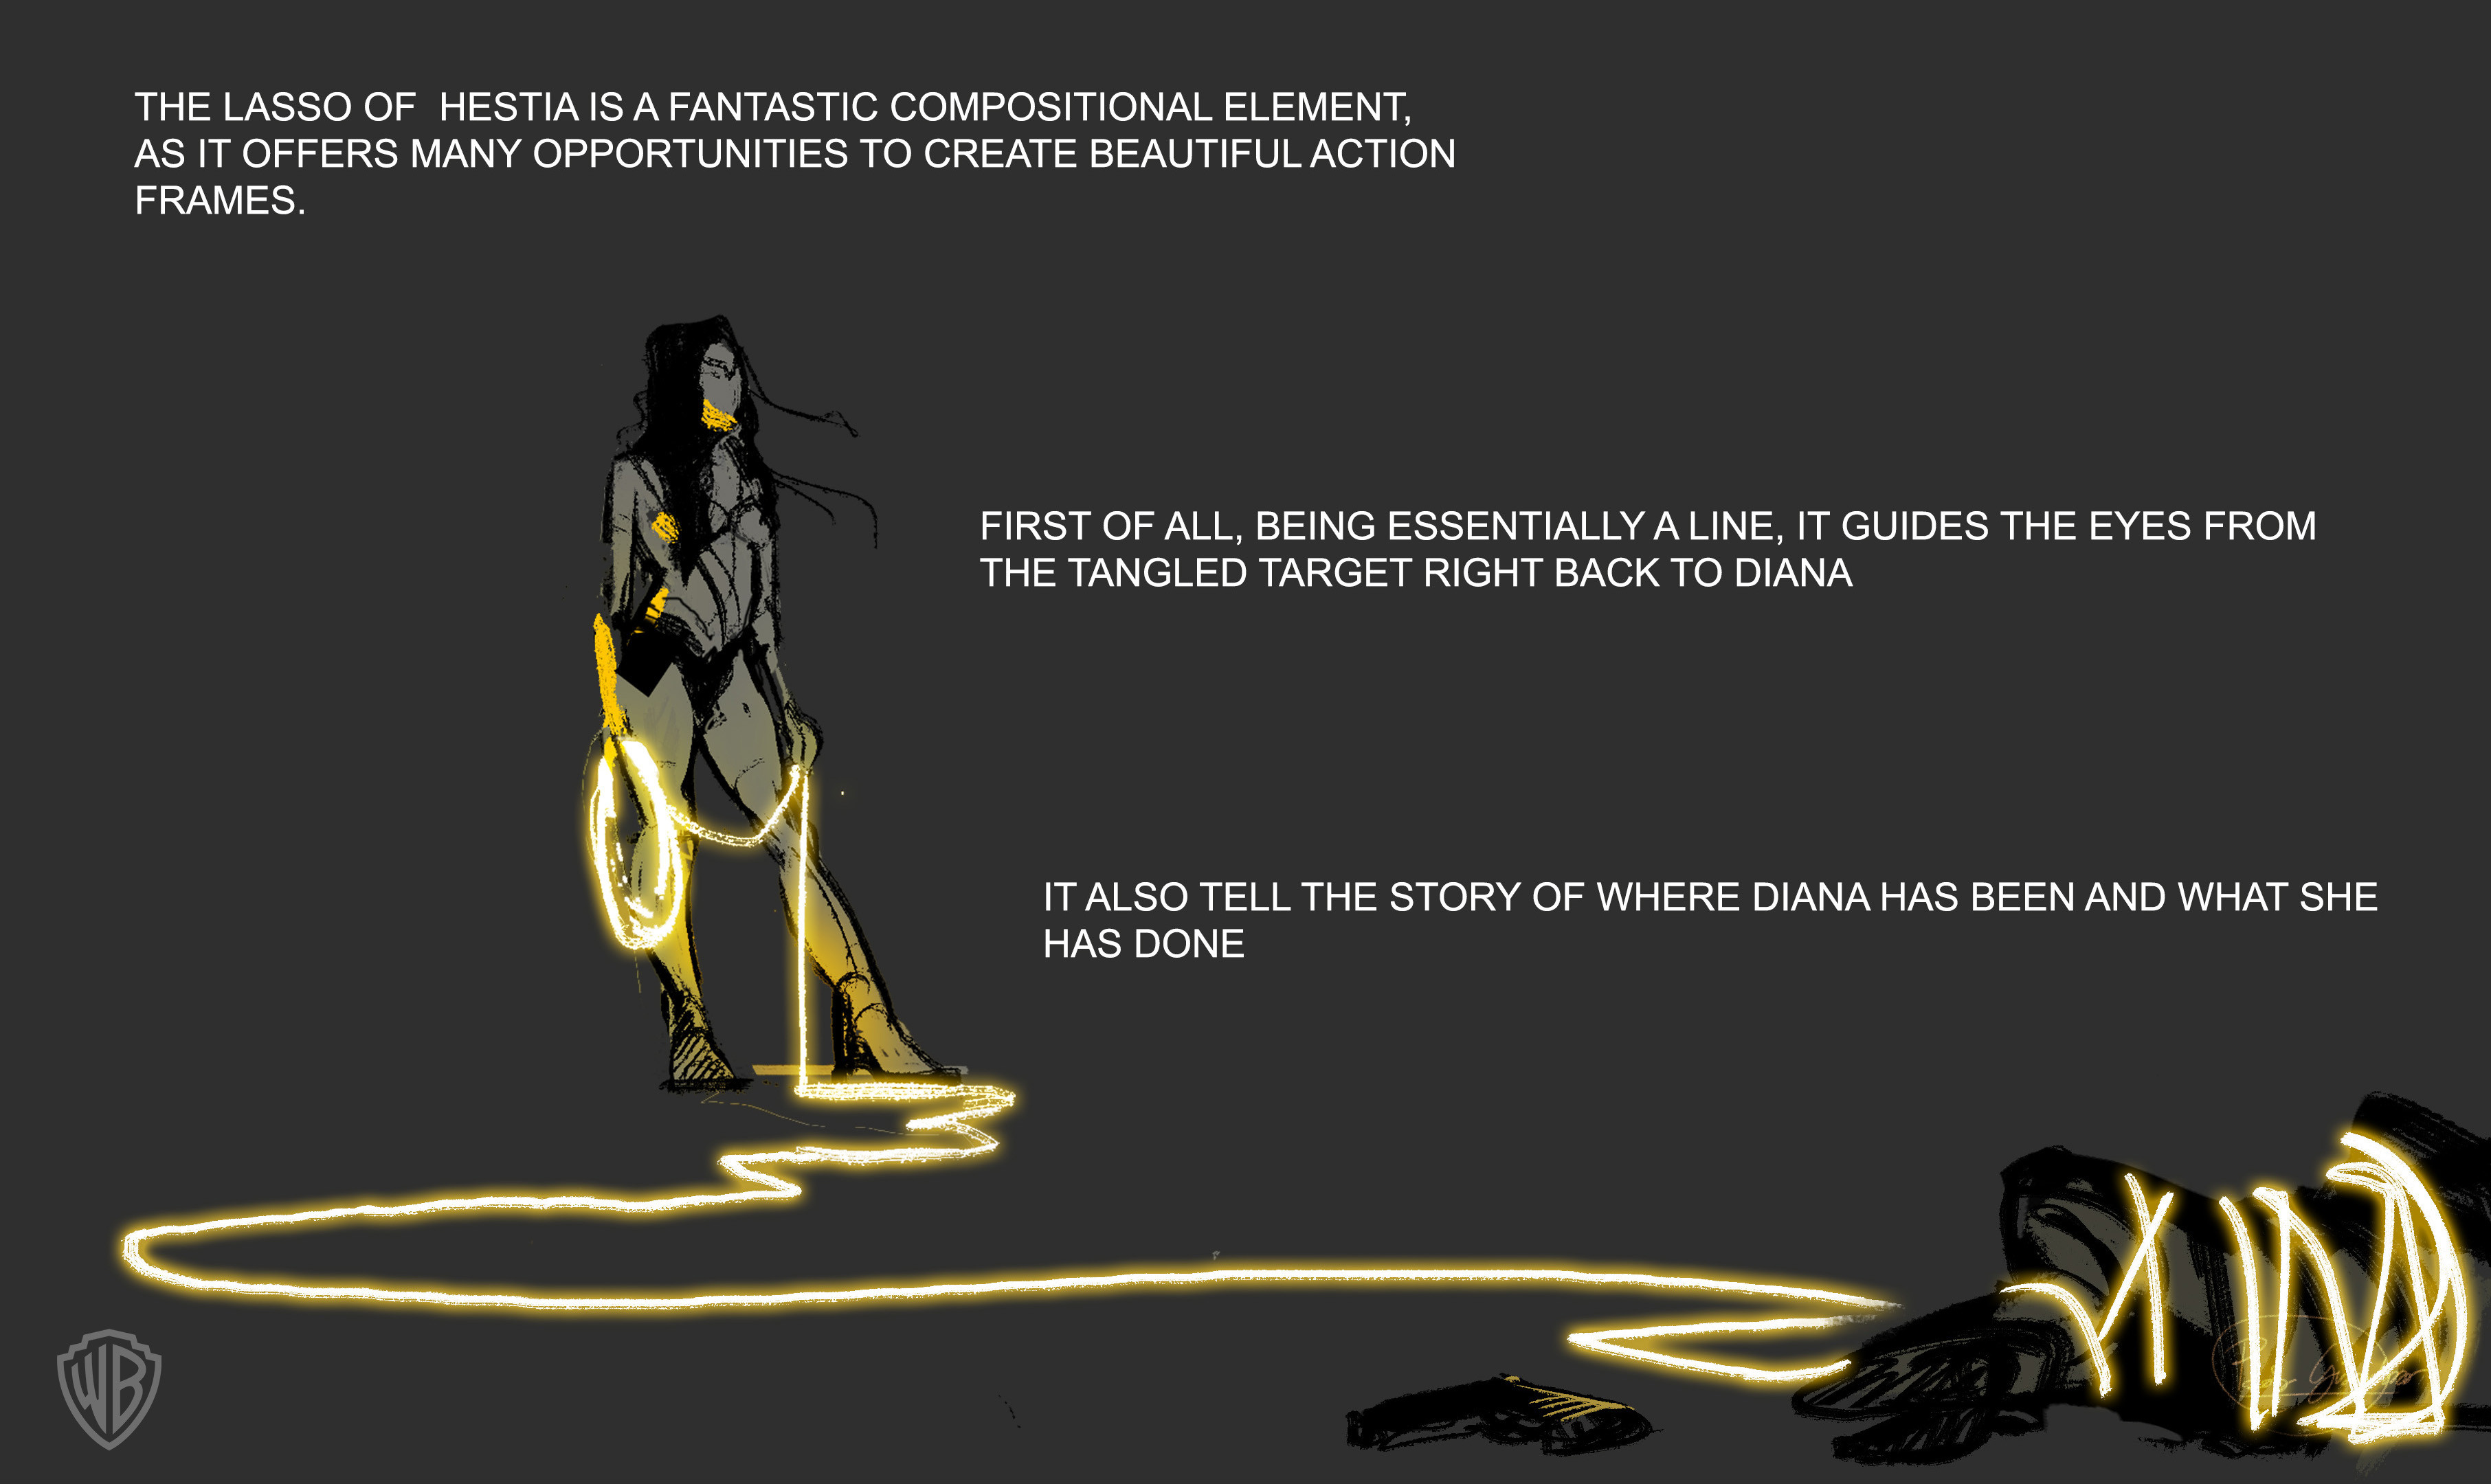 I was asked to find ideas for how Diana could fight with the Lasso of Hestia in a way that focused on her acrobatic skills.